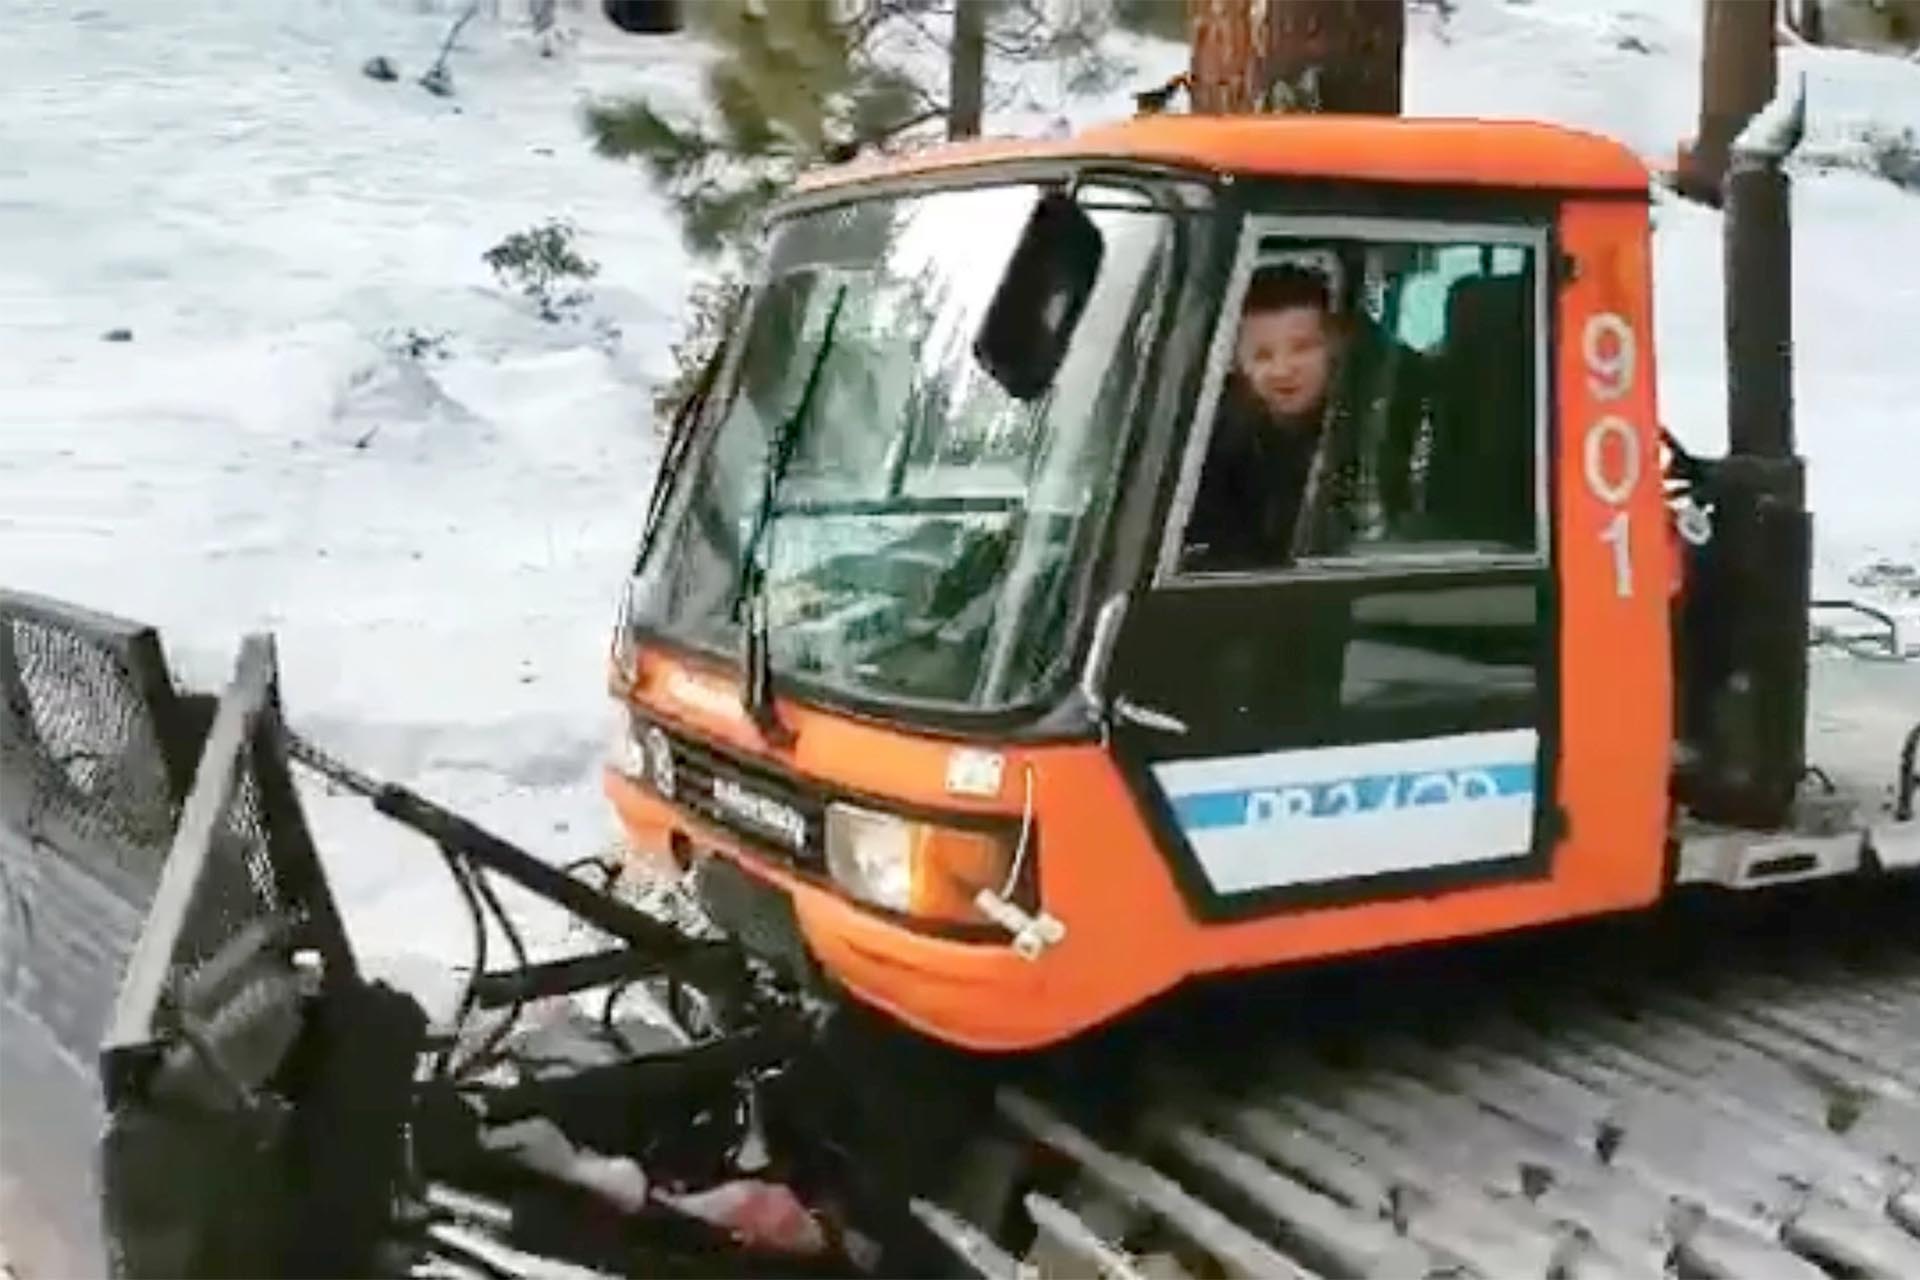 File photo of Renner driving a snowplow